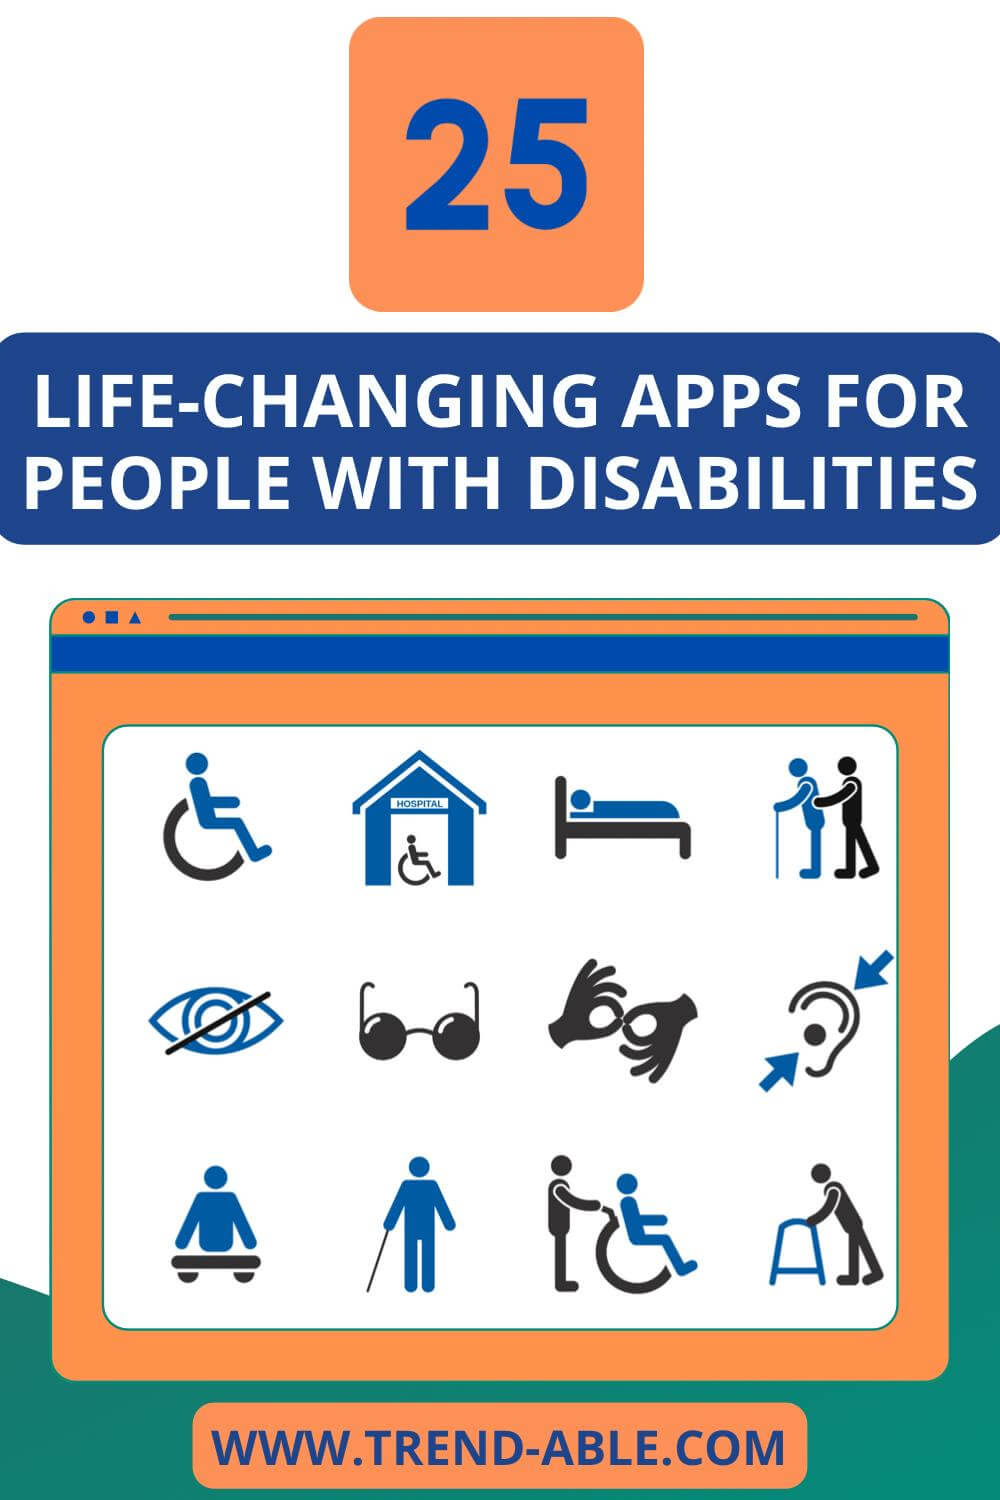 Top 10 tech gadgets for Persons with disabilities 